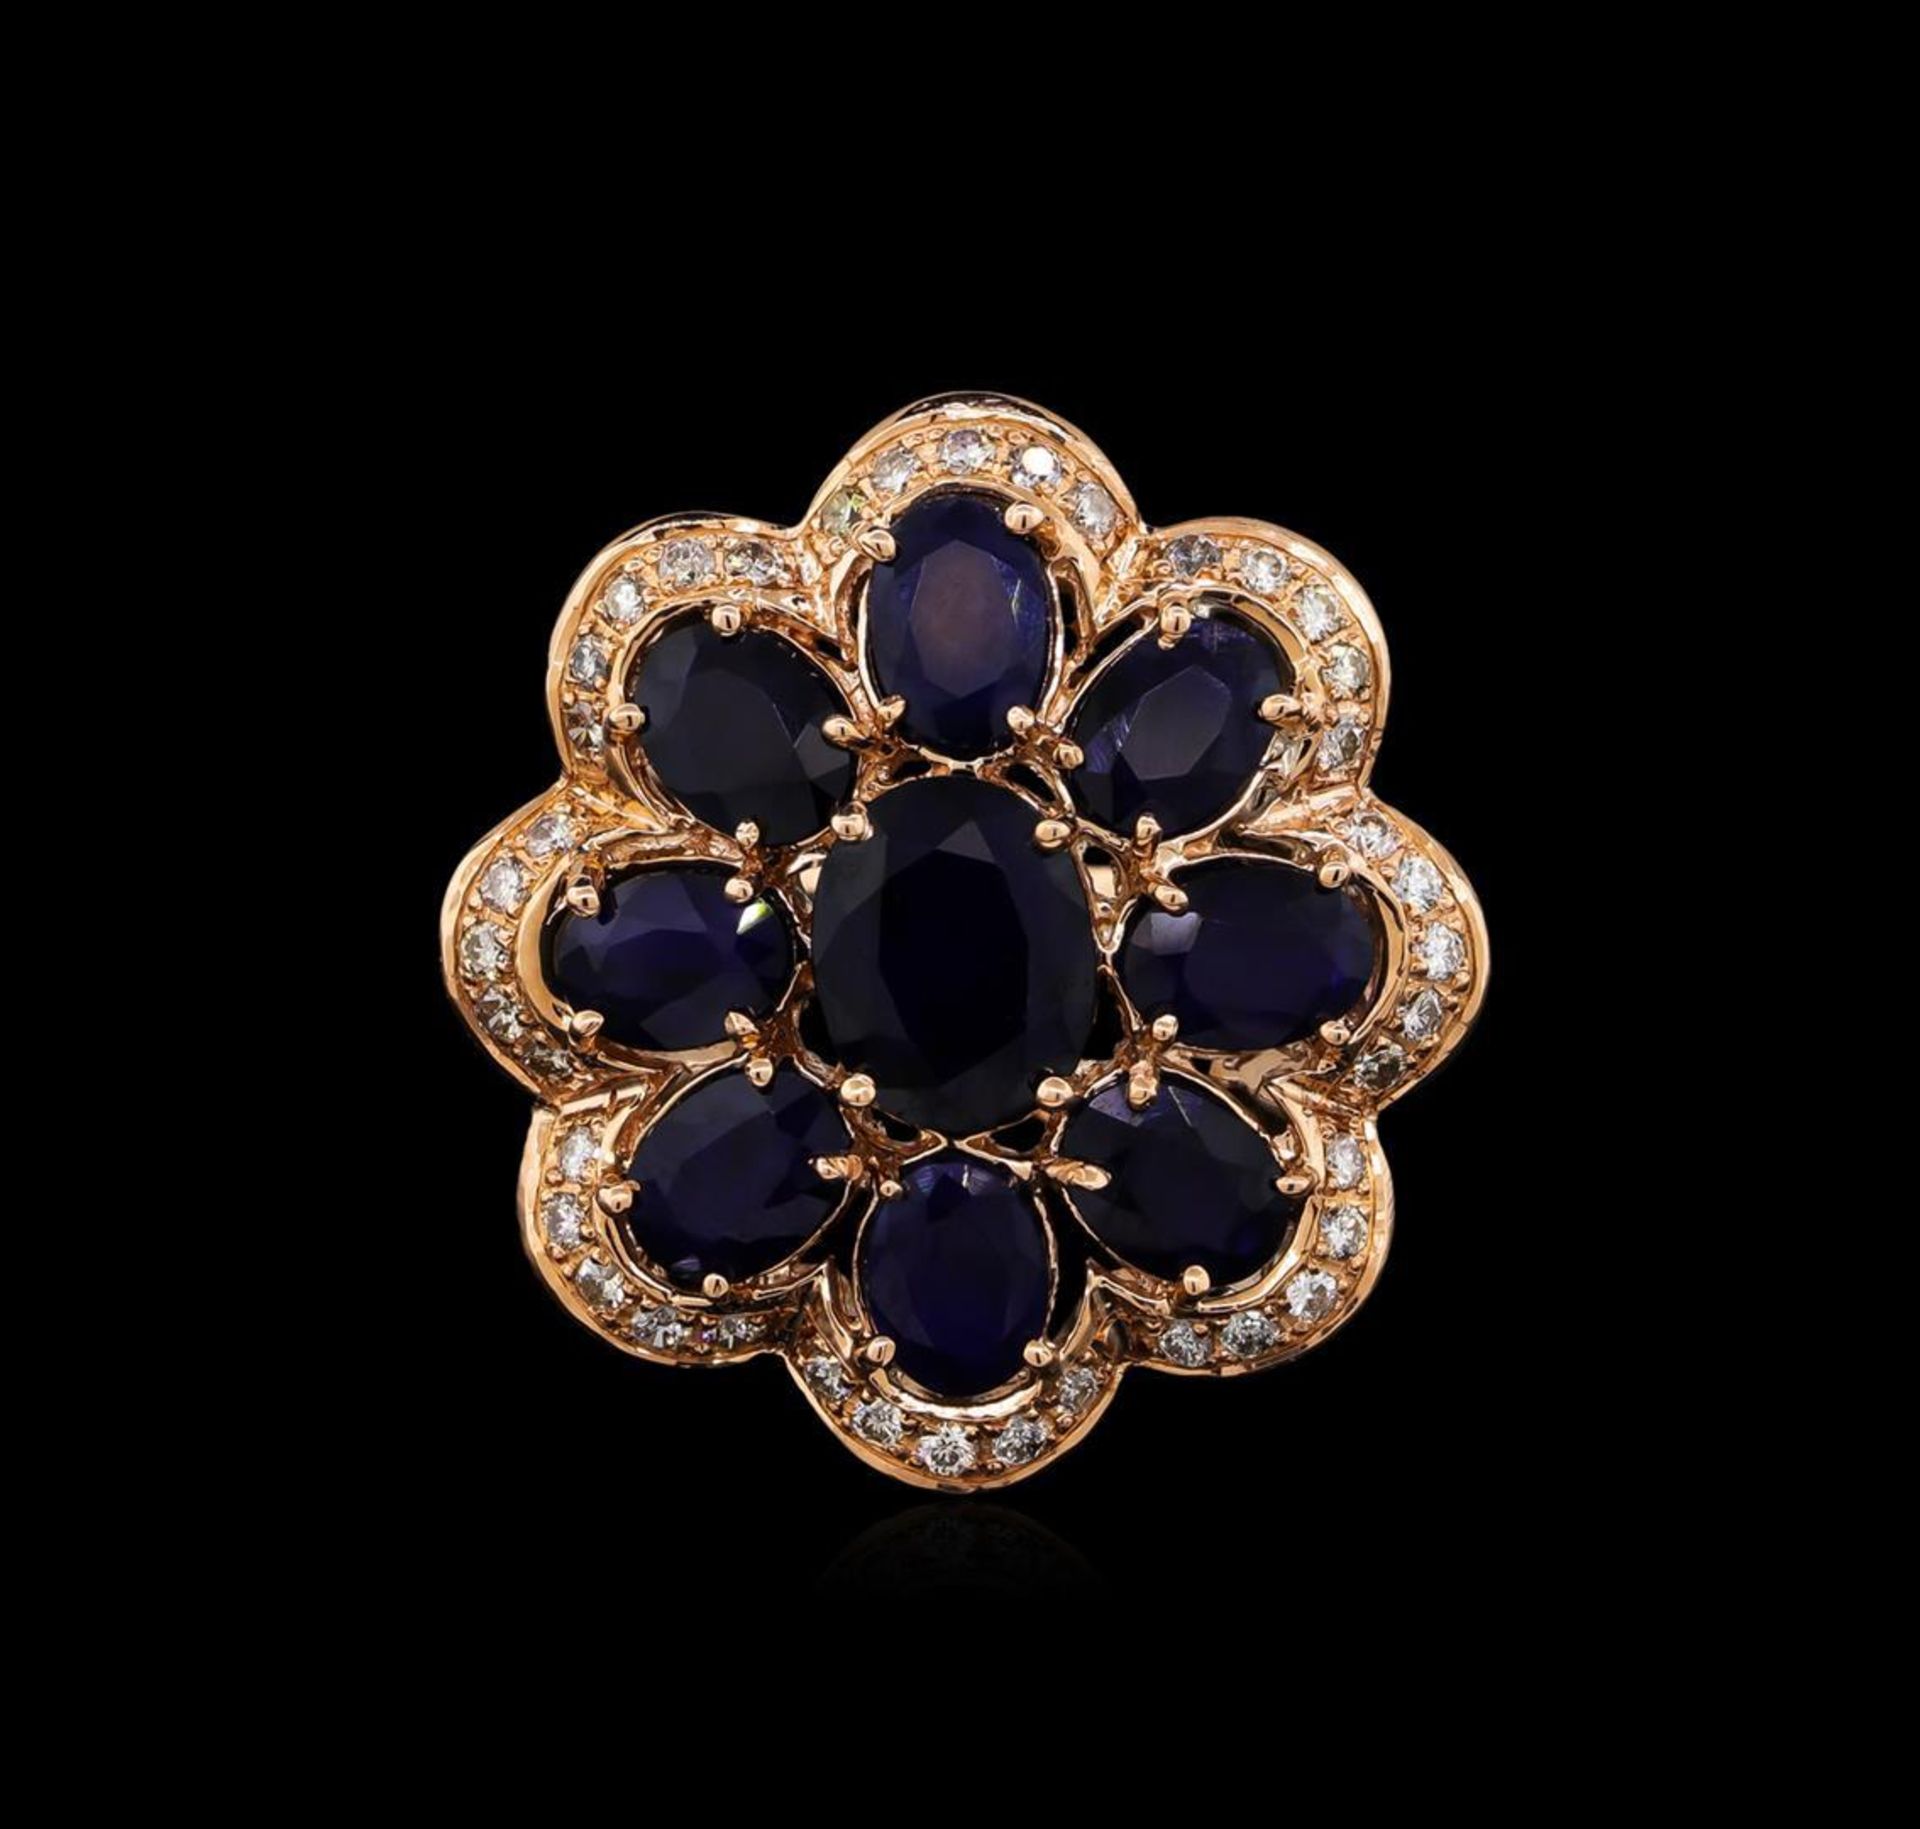 14KT Rose Gold 10.37 ctw Sapphire Ring - Image 2 of 5